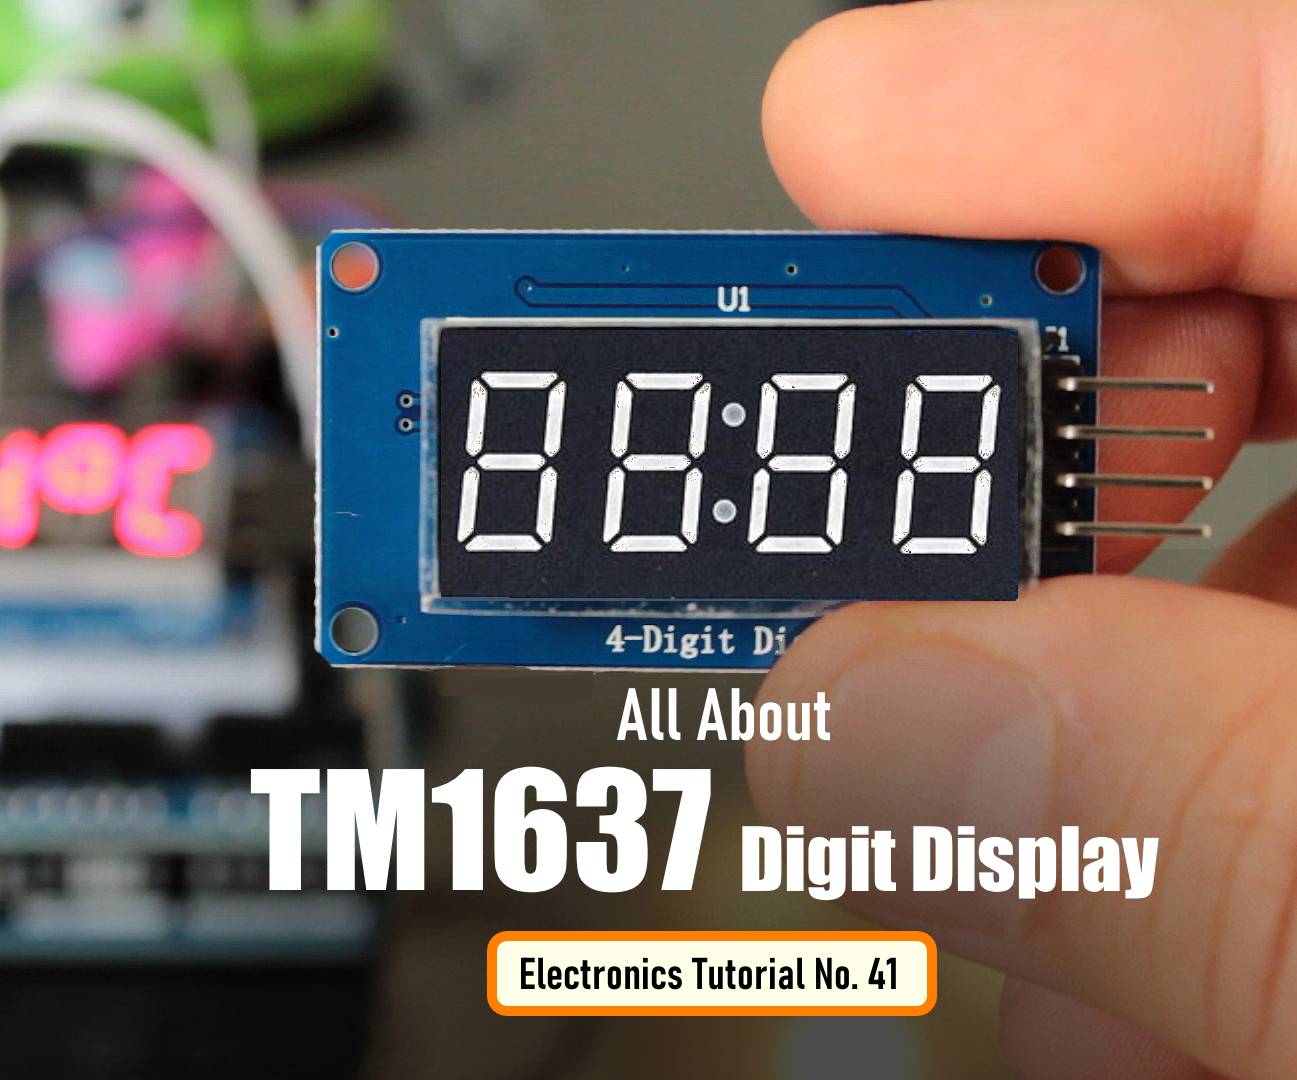 How to Use the TM1637 Digit Display With Arduino